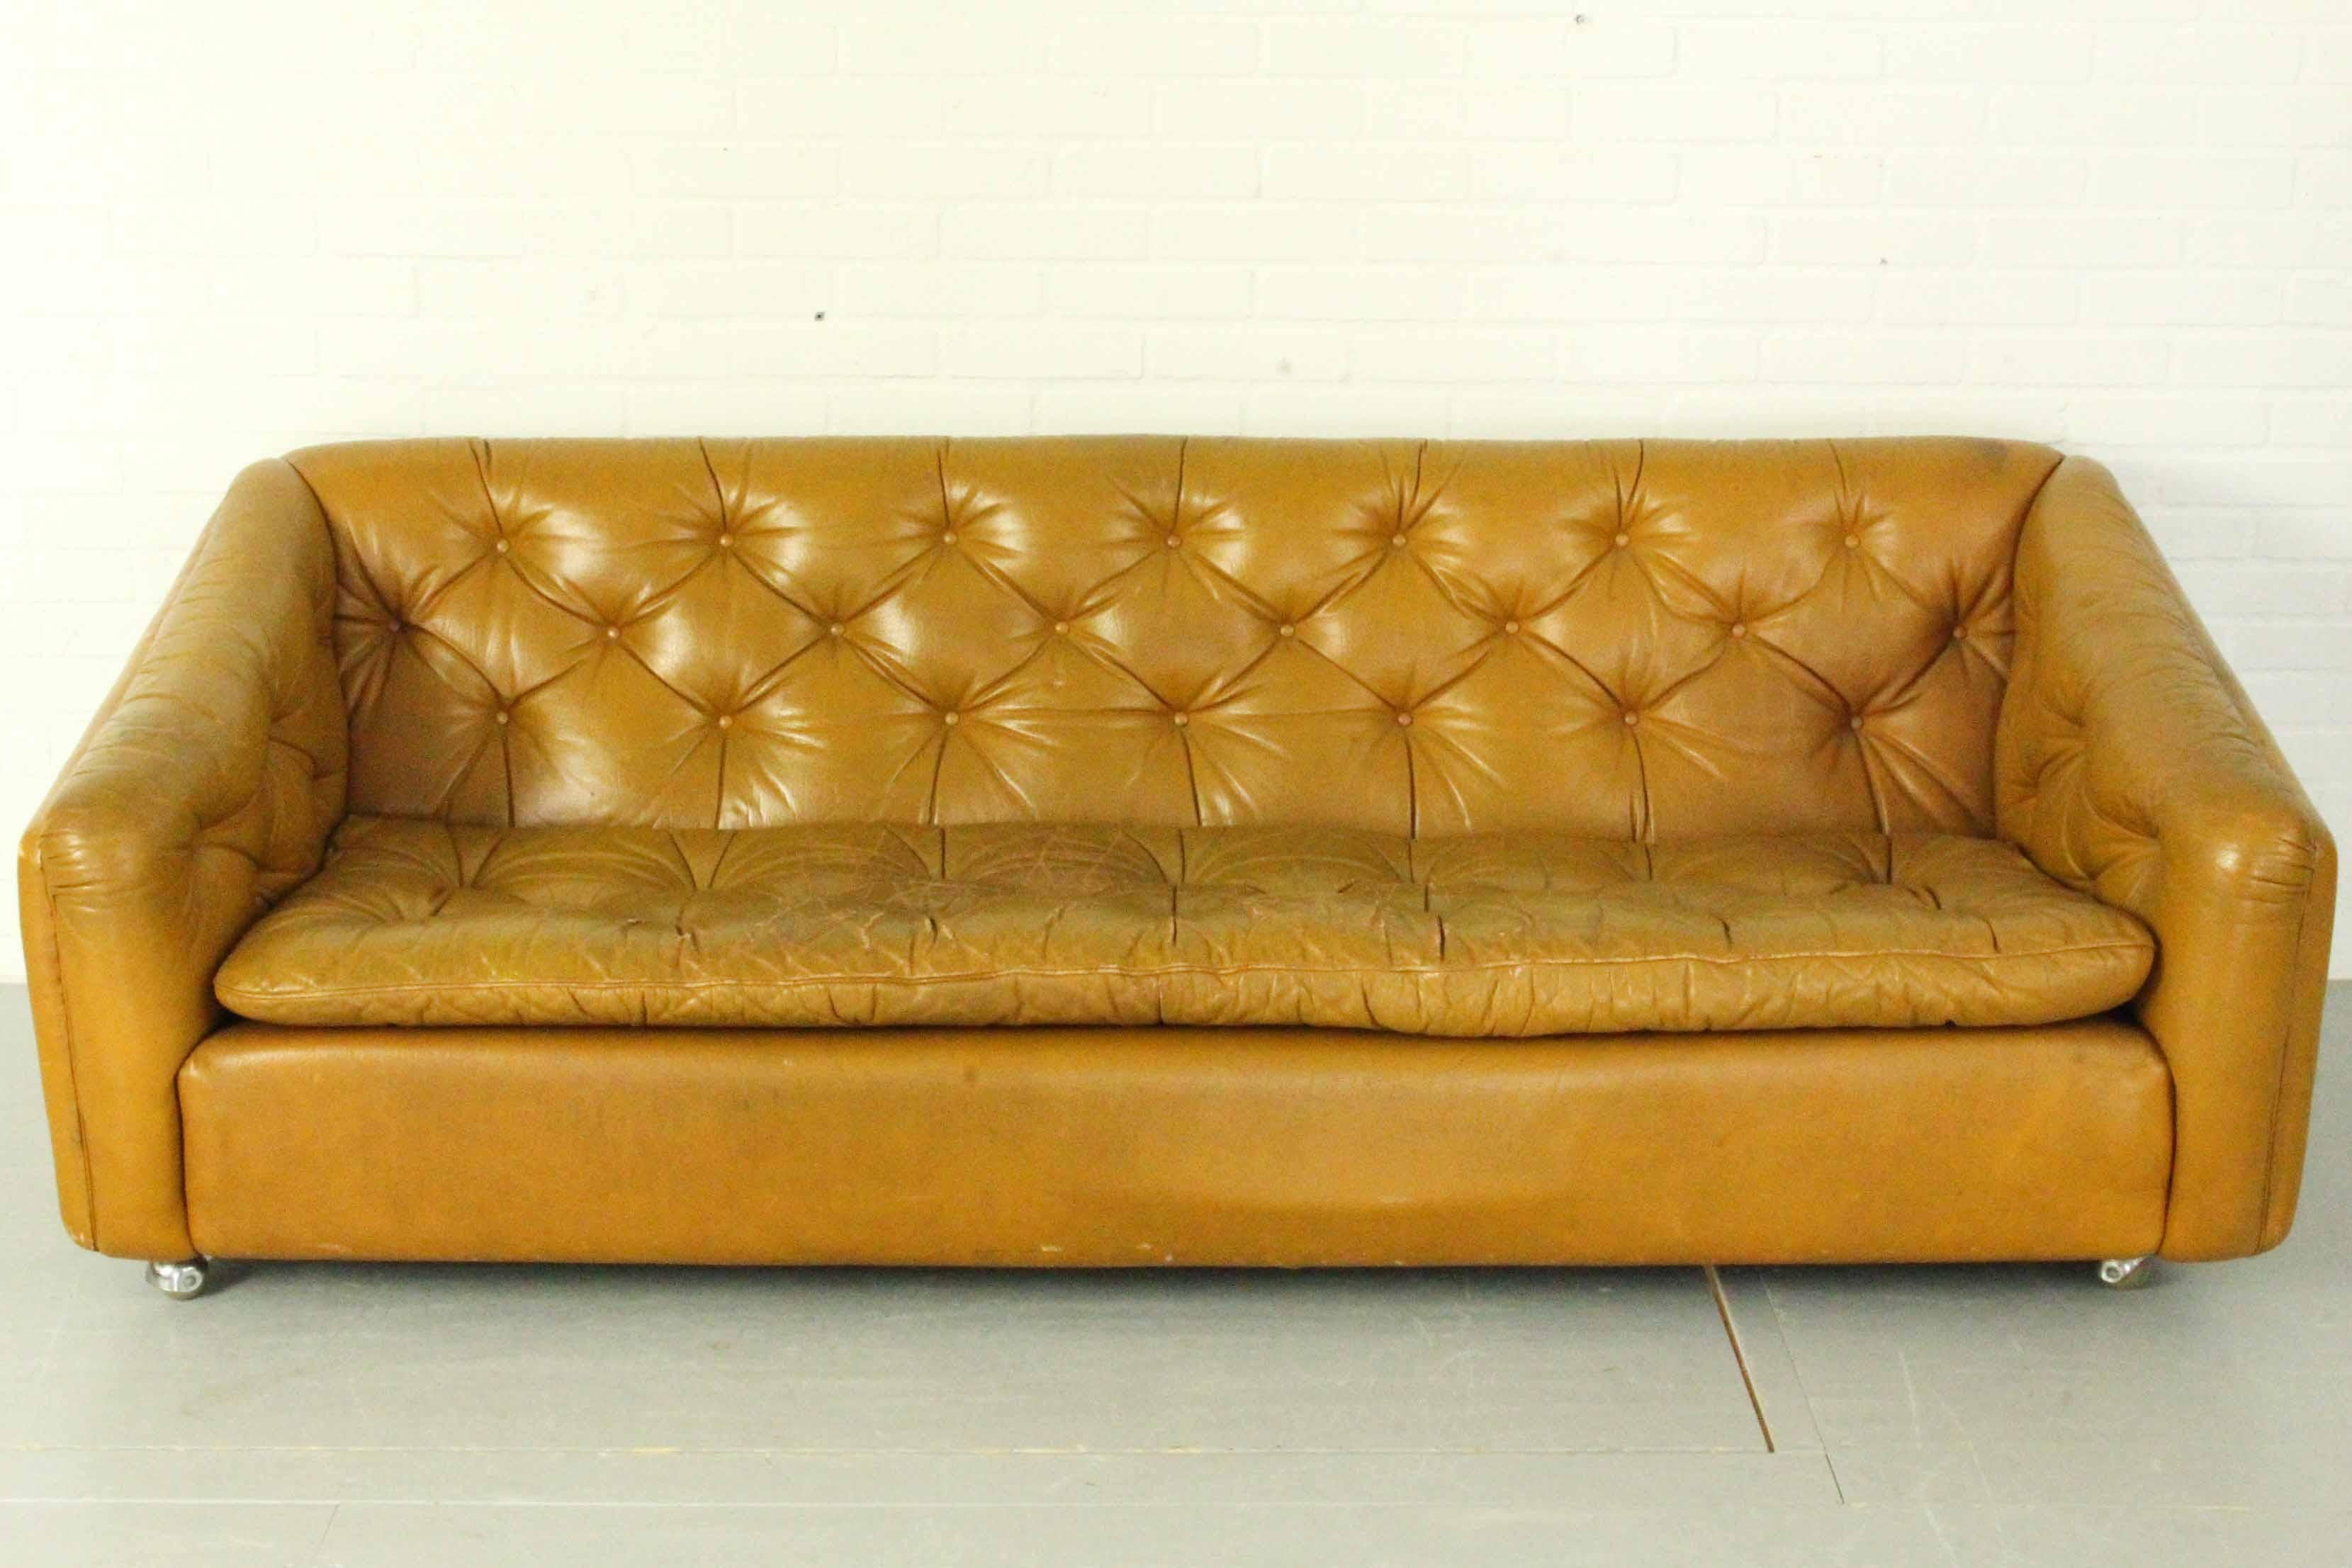 Beautiful design classic sofa with cognac leather upholstery. The sofa is in vintage condition, the leather shows its age with patina scratches and cracks, but no tears.